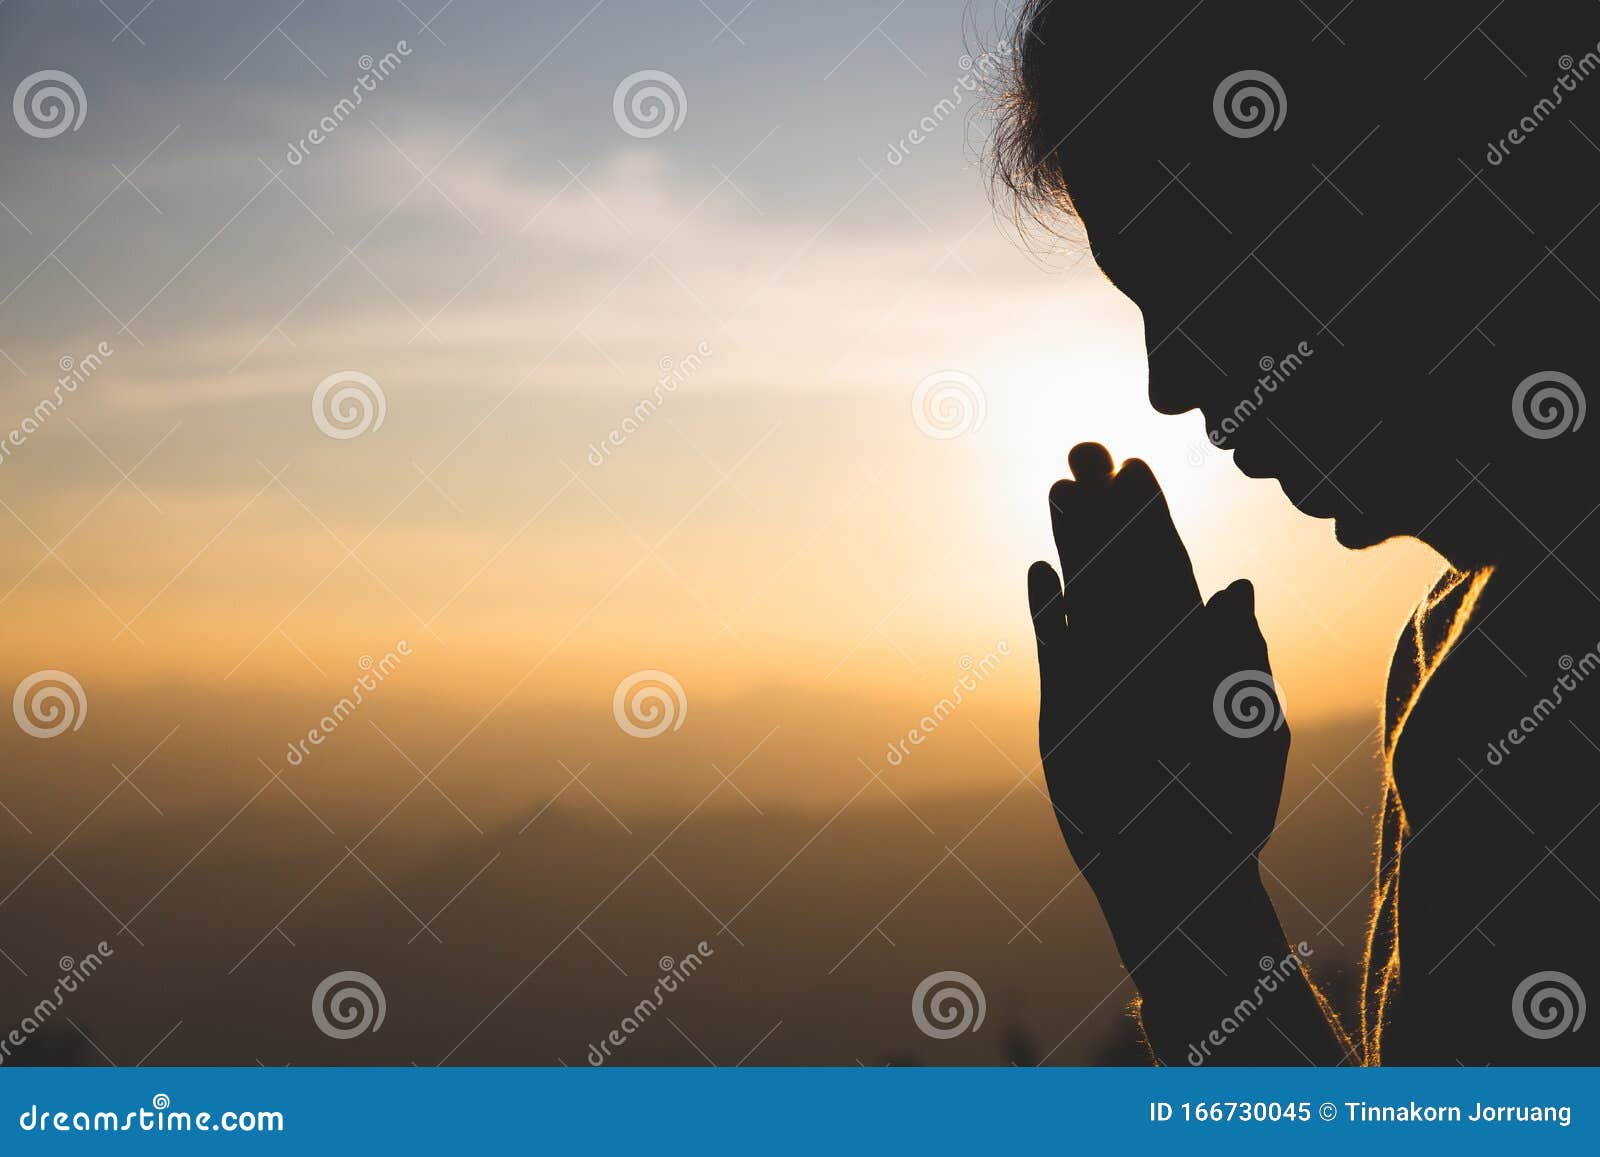 silhouette of a woman  praying hands with faith in religion and belief in god on the morning sunrise background.  namaste or